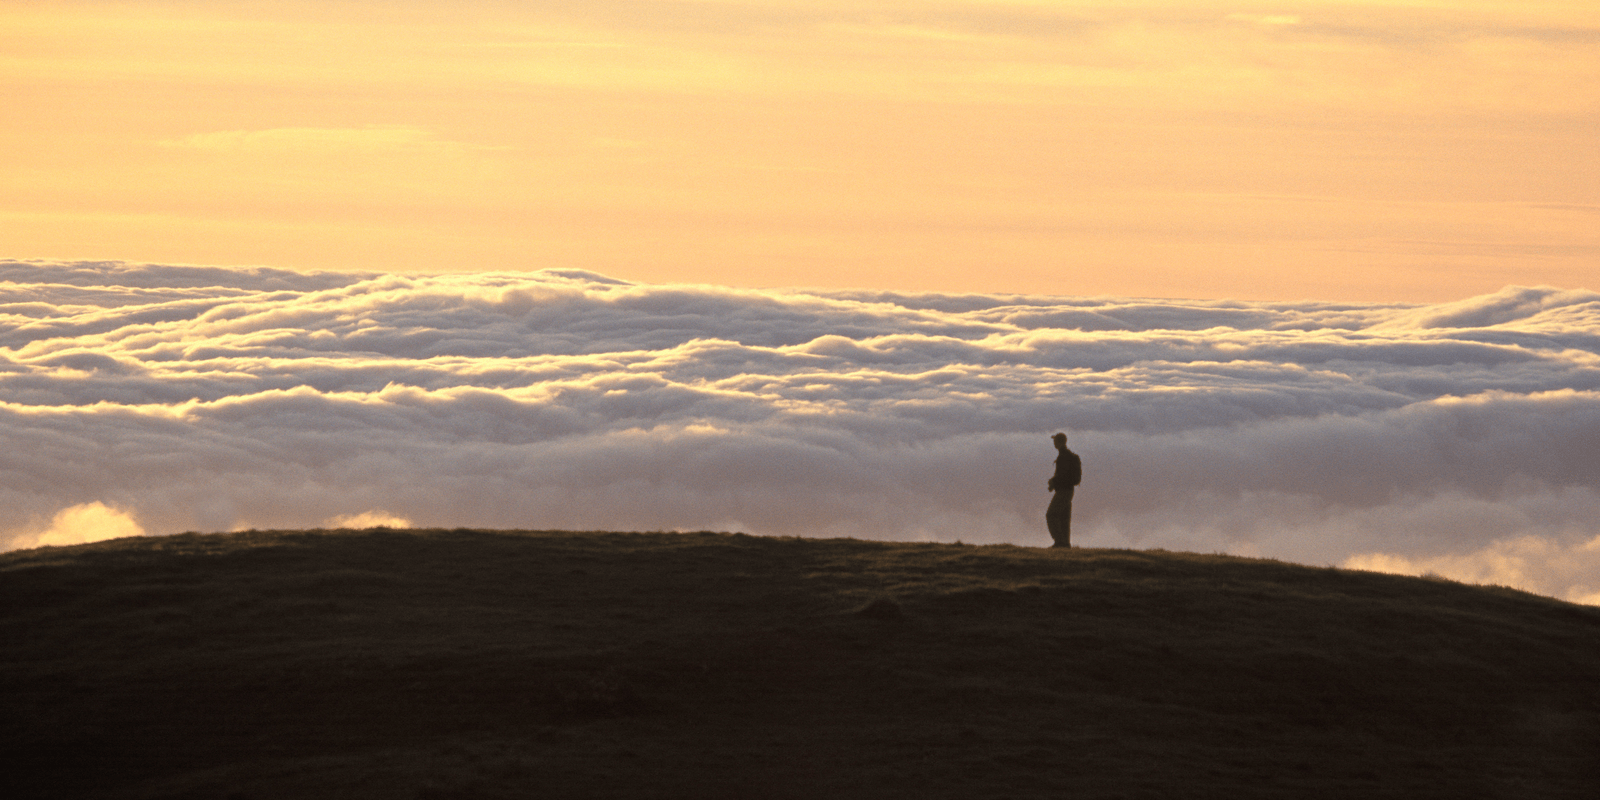 bolinas ridge_do_hikes_above the clouds_feature image_800x400_ben davidson